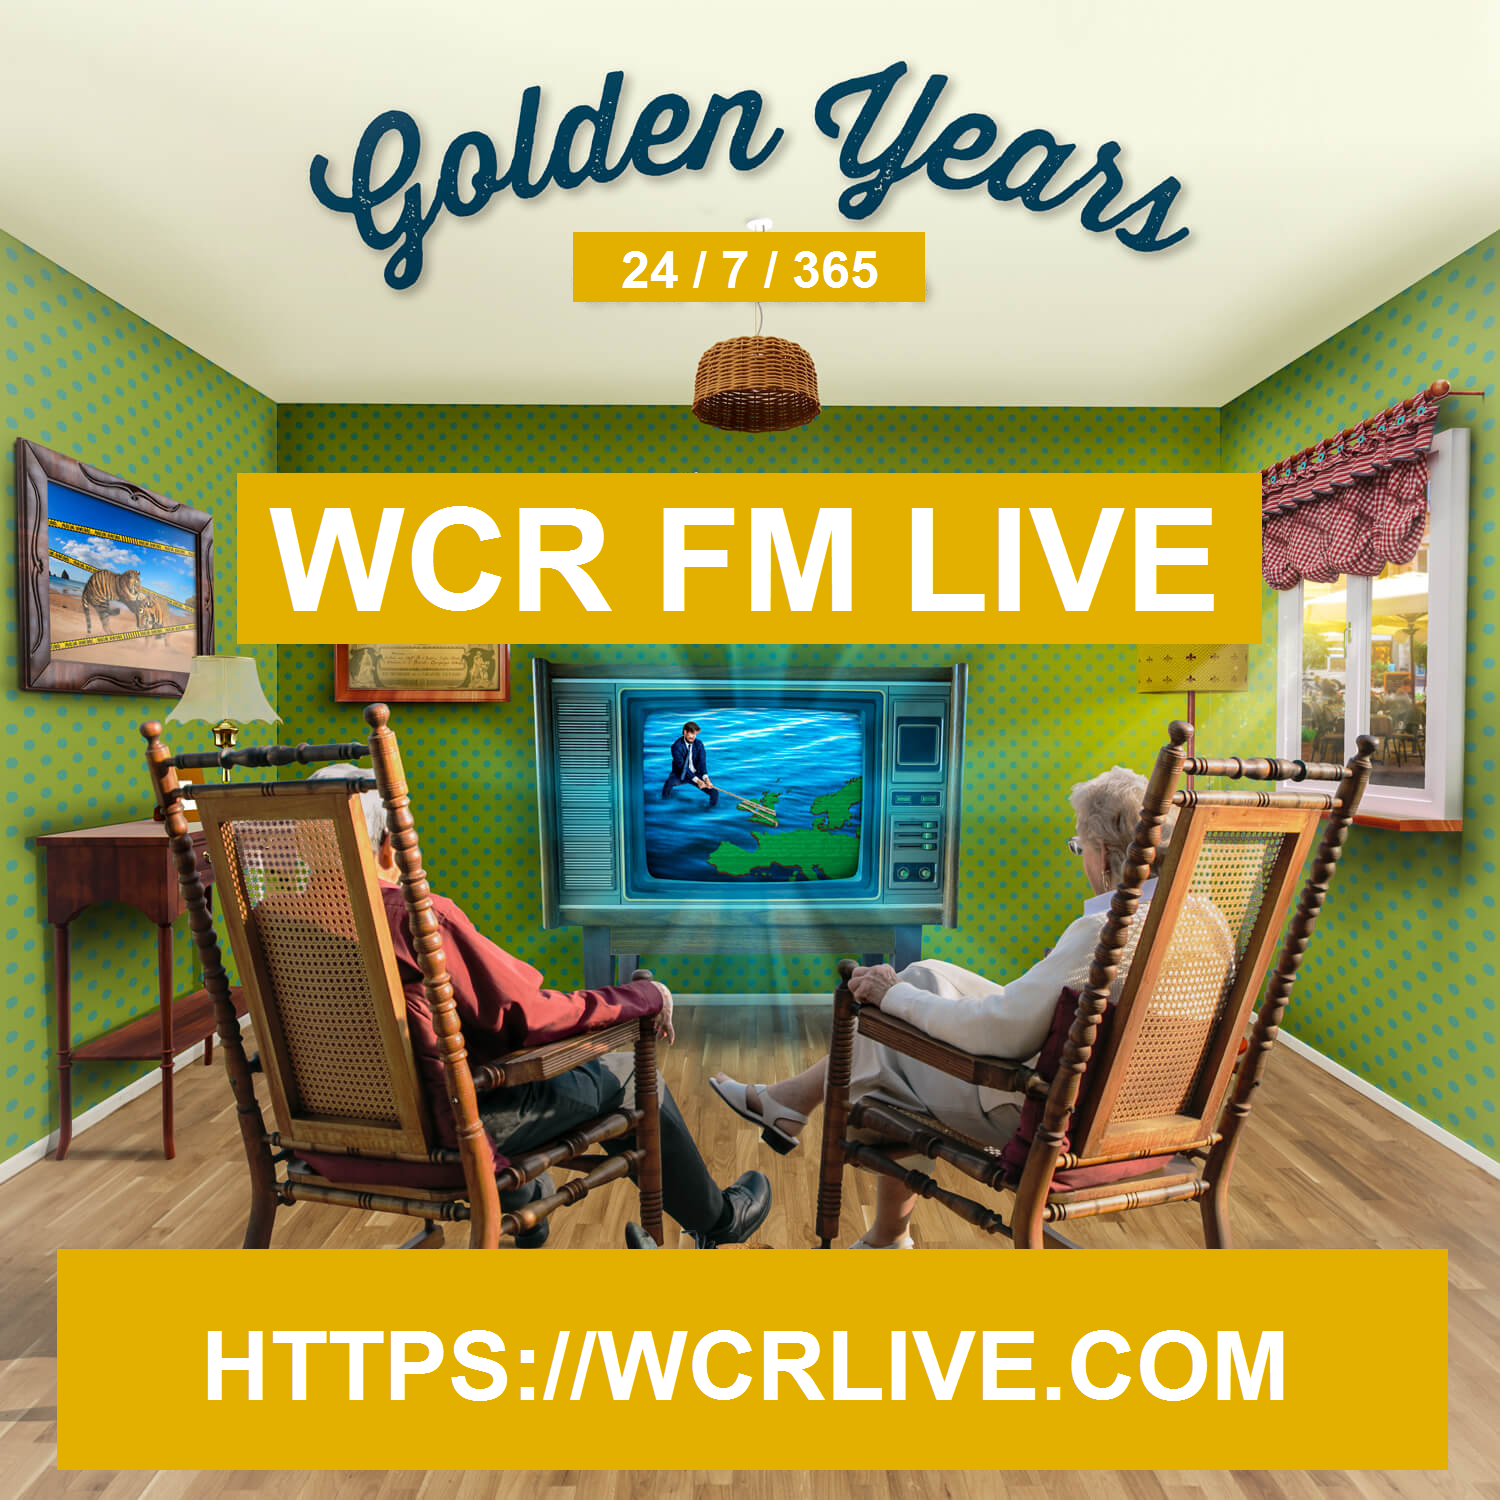 The Golden Years WCR FM Live